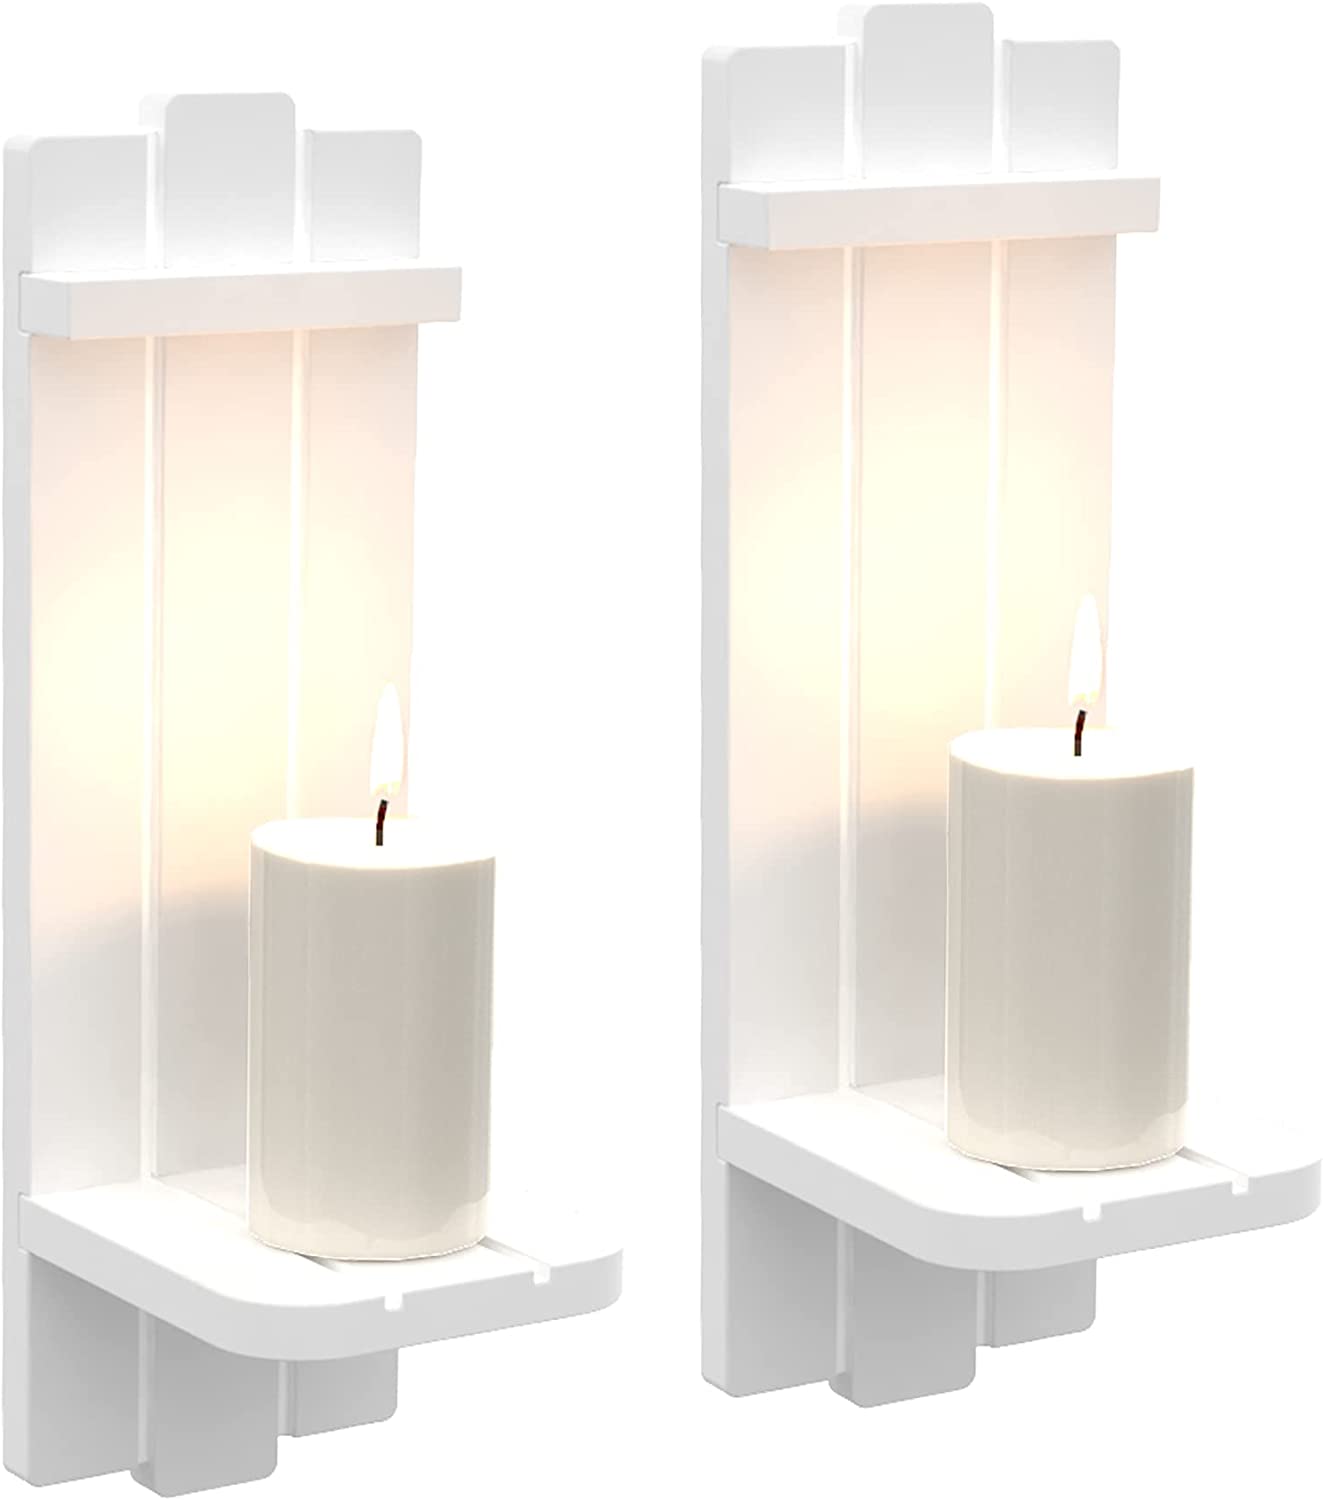 Wall Decor Set of 2, Wall Candle Holder Rustic Home Decor, Farmhouse Wall Art Floating Candle Sconces Shelf White Wall Decorations for Living Room, Dining Room, Bedroom, Bathroom